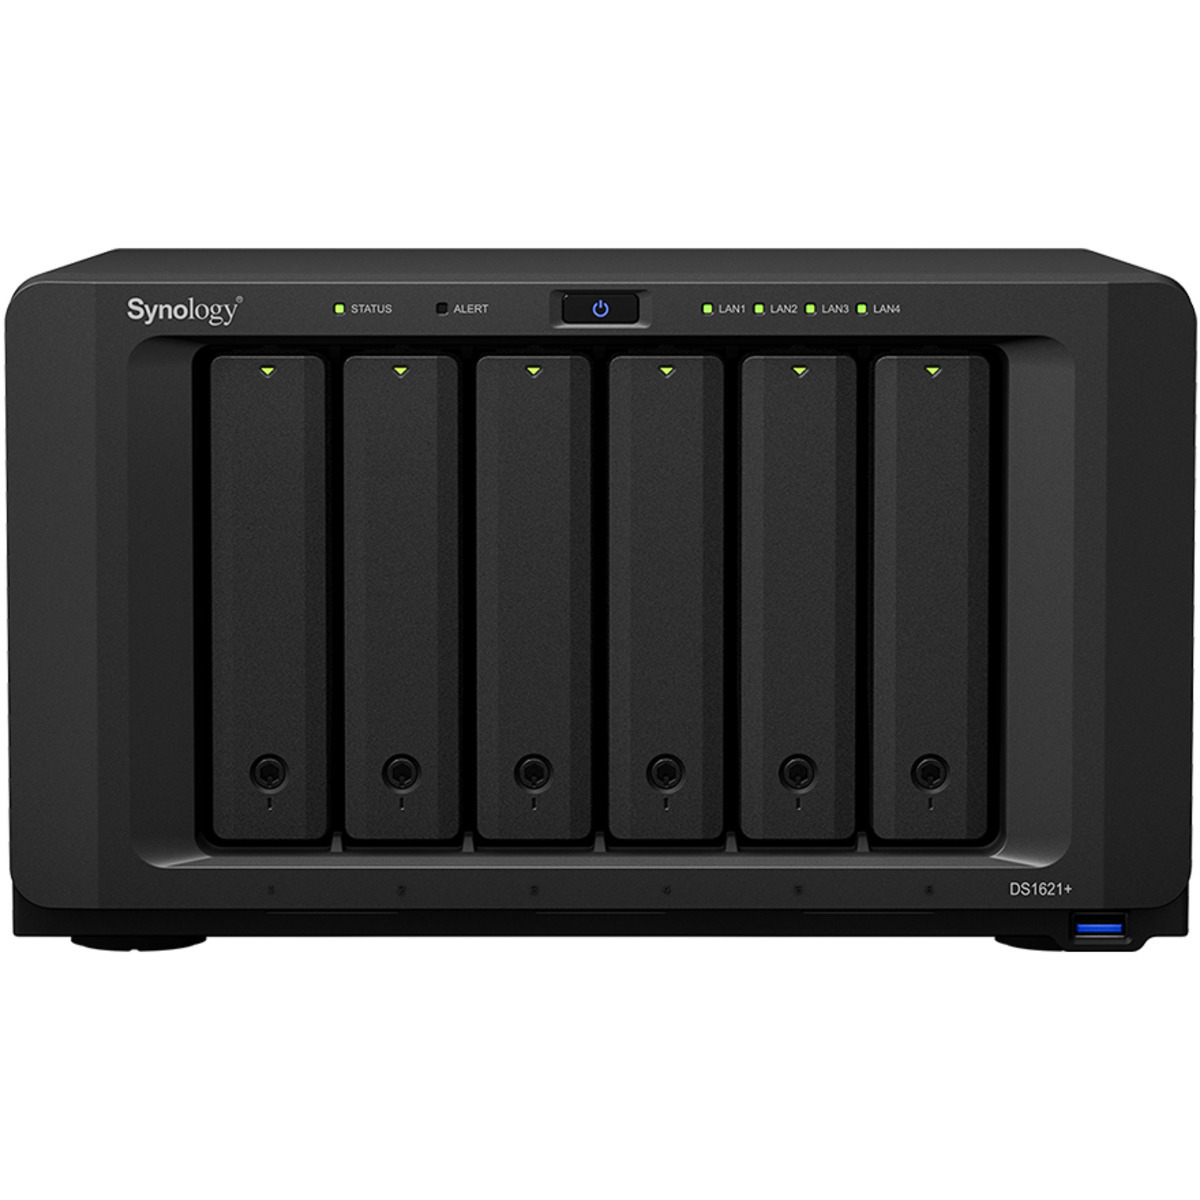 Synology DiskStation DS1621+ 120tb 6-Bay Desktop Multimedia / Power User / Business NAS - Network Attached Storage Device 5x24tb Seagate IronWolf Pro ST24000NT002 3.5 7200rpm SATA 6Gb/s HDD NAS Class Drives Installed - Burn-In Tested - FREE RAM UPGRADE DiskStation DS1621+